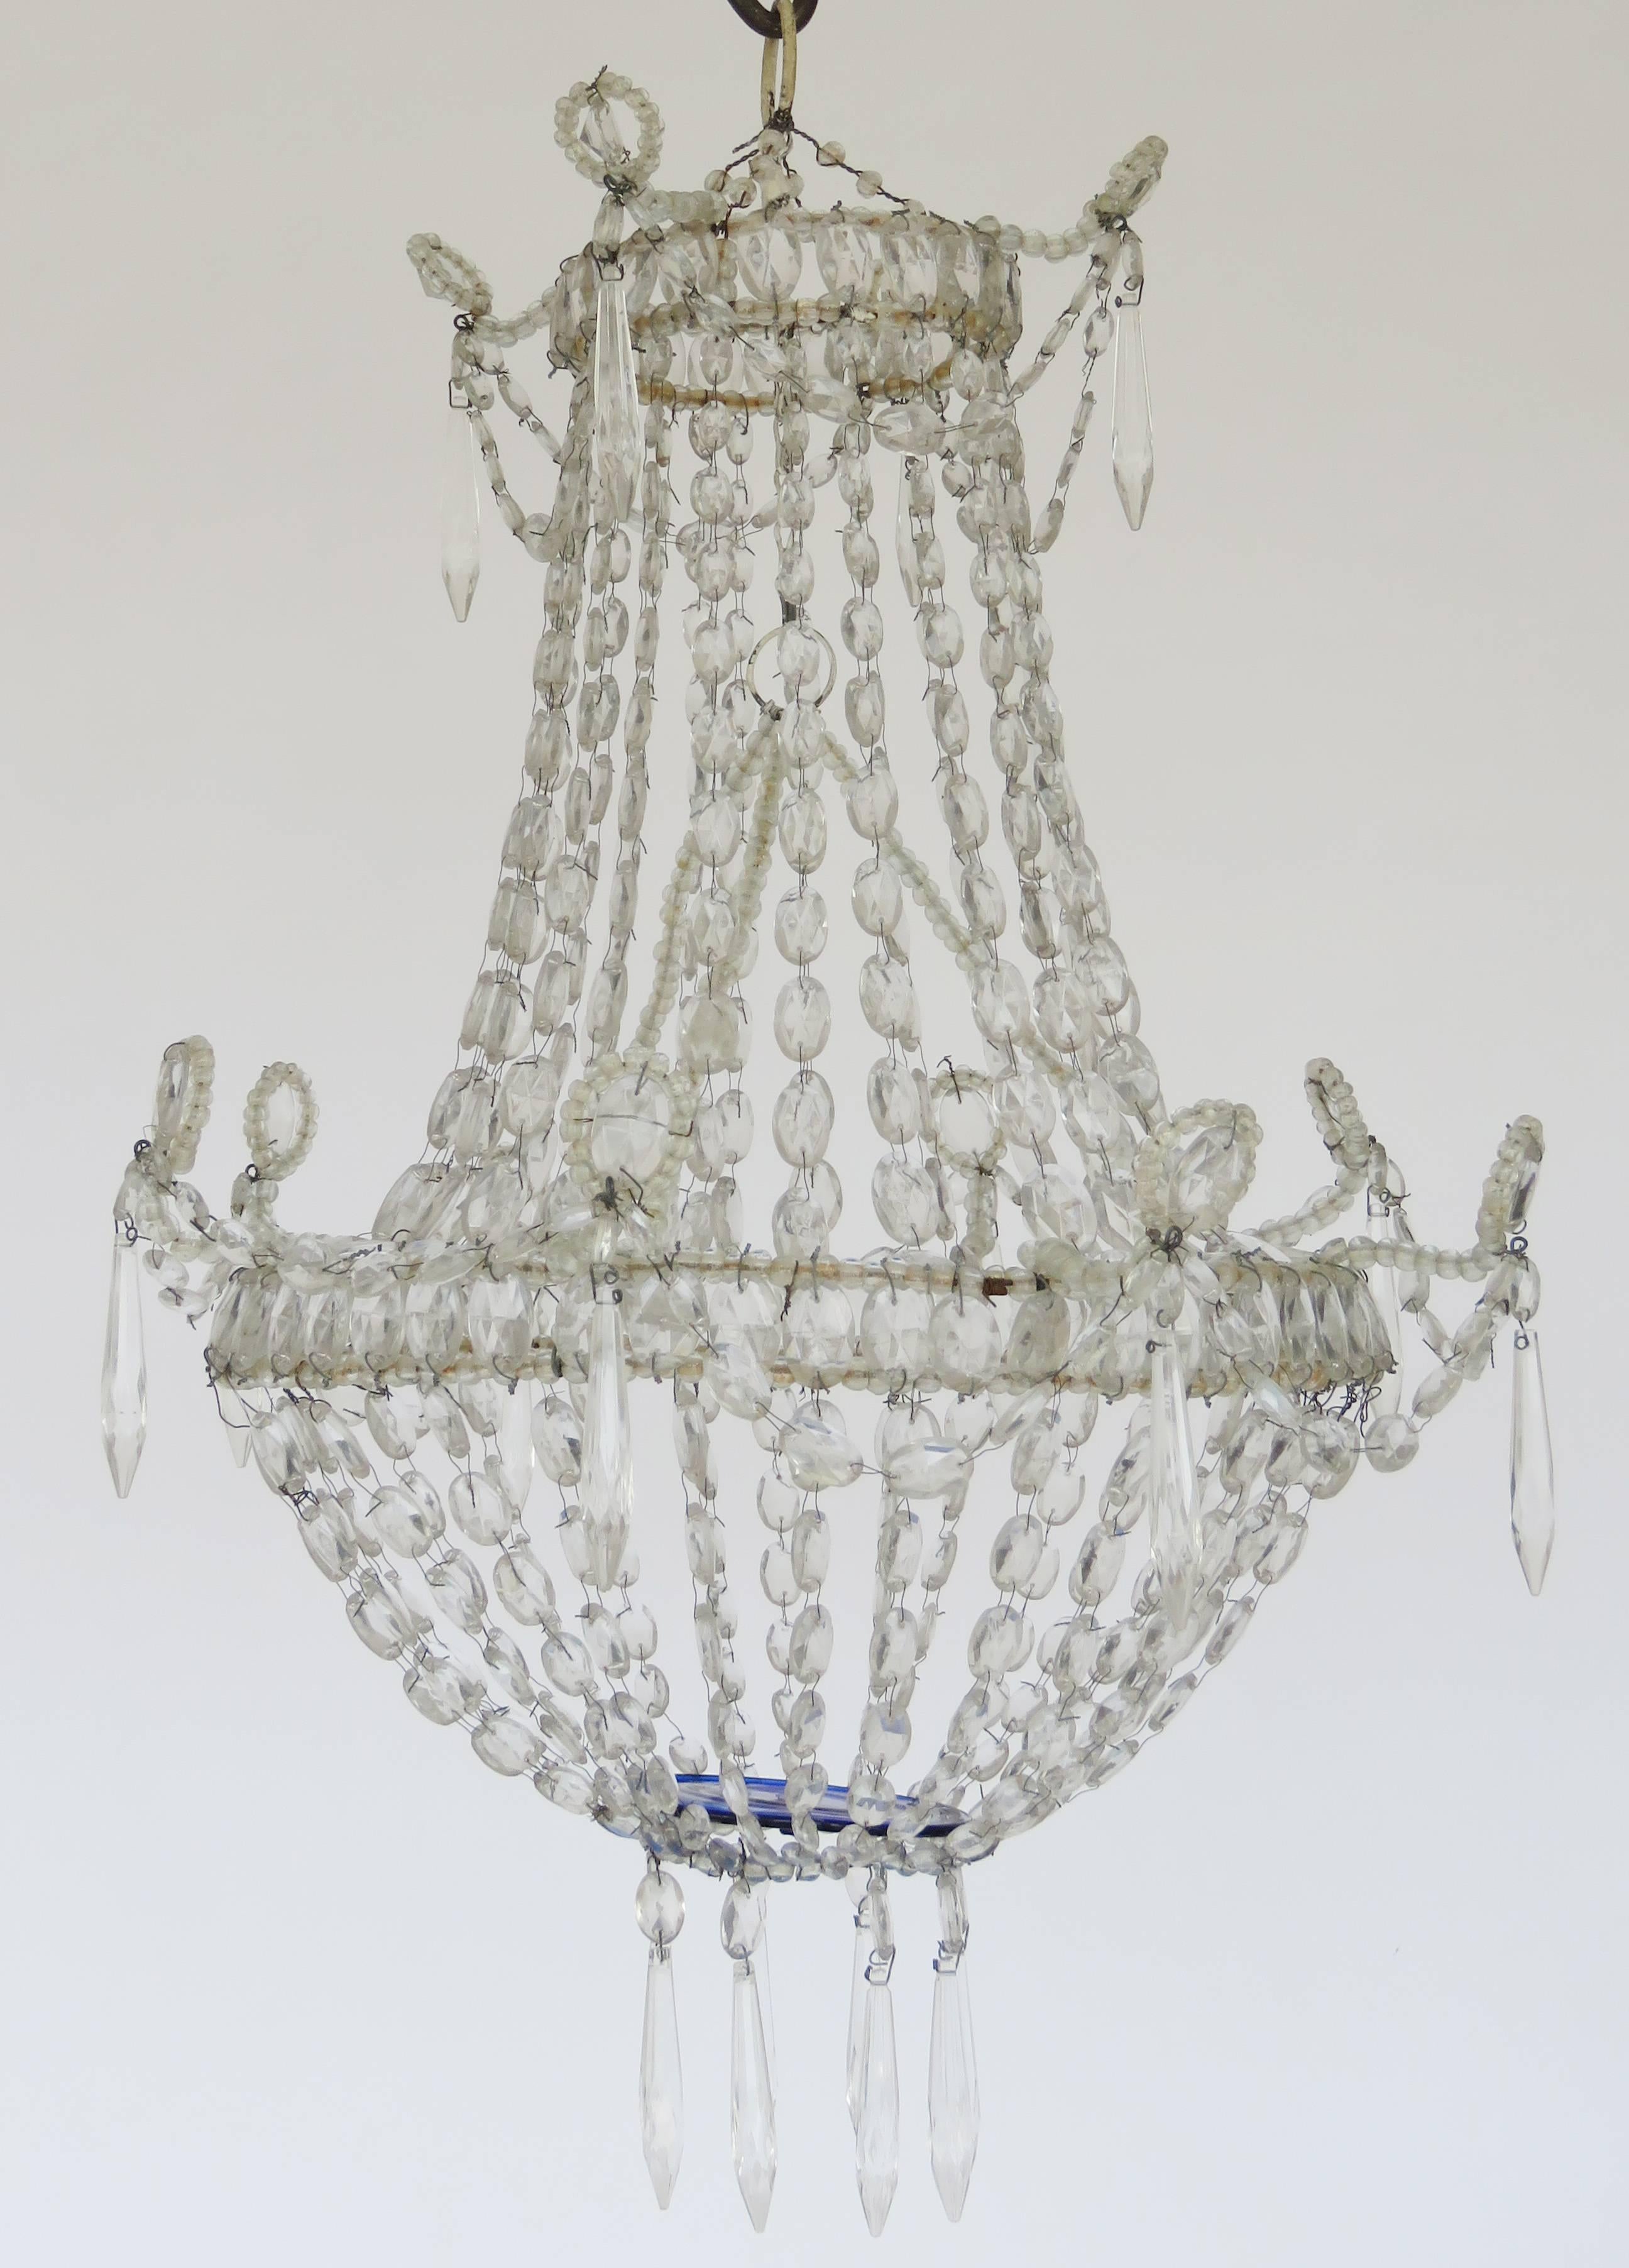 French 19th Century Neoclassical Crystal Basket Chandelier For Sale